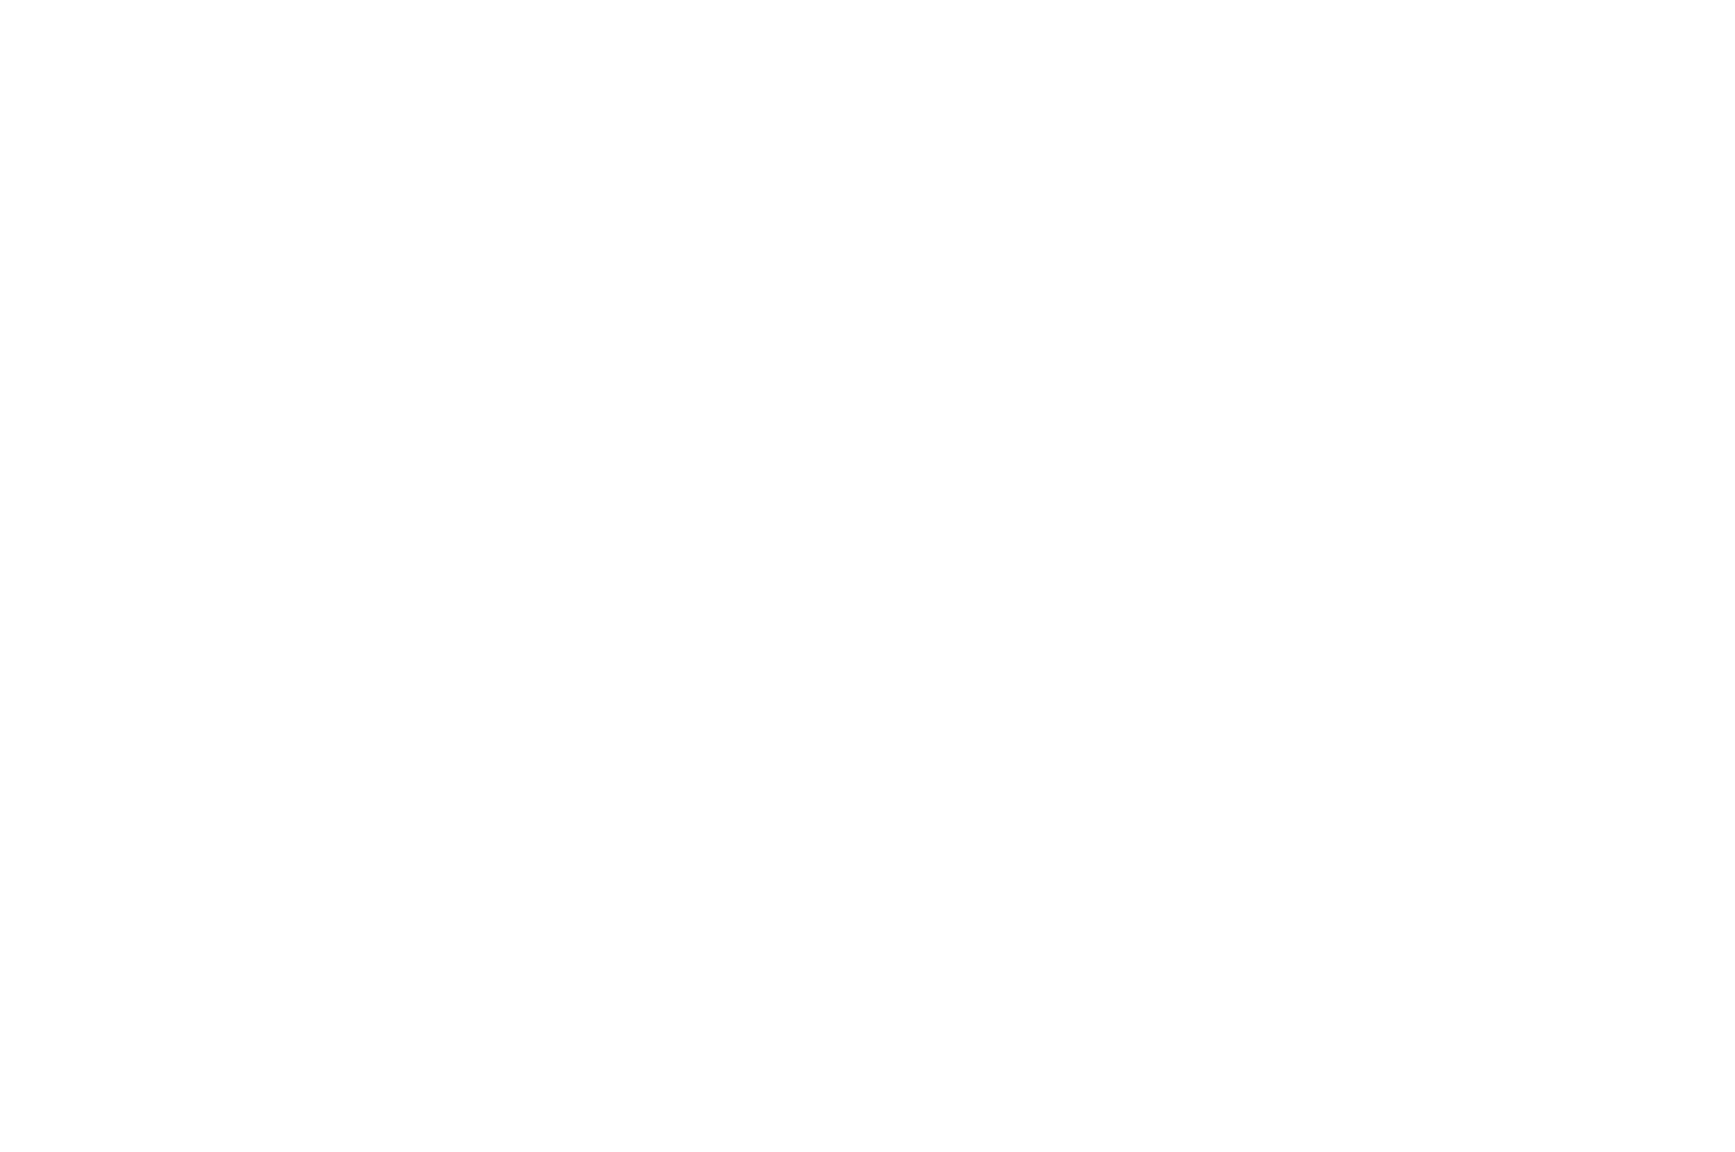 BEST MUSIC VIDEO 2021 - CANNES WORLD FILM FESTIVAL - ONEFIFTY - XTC